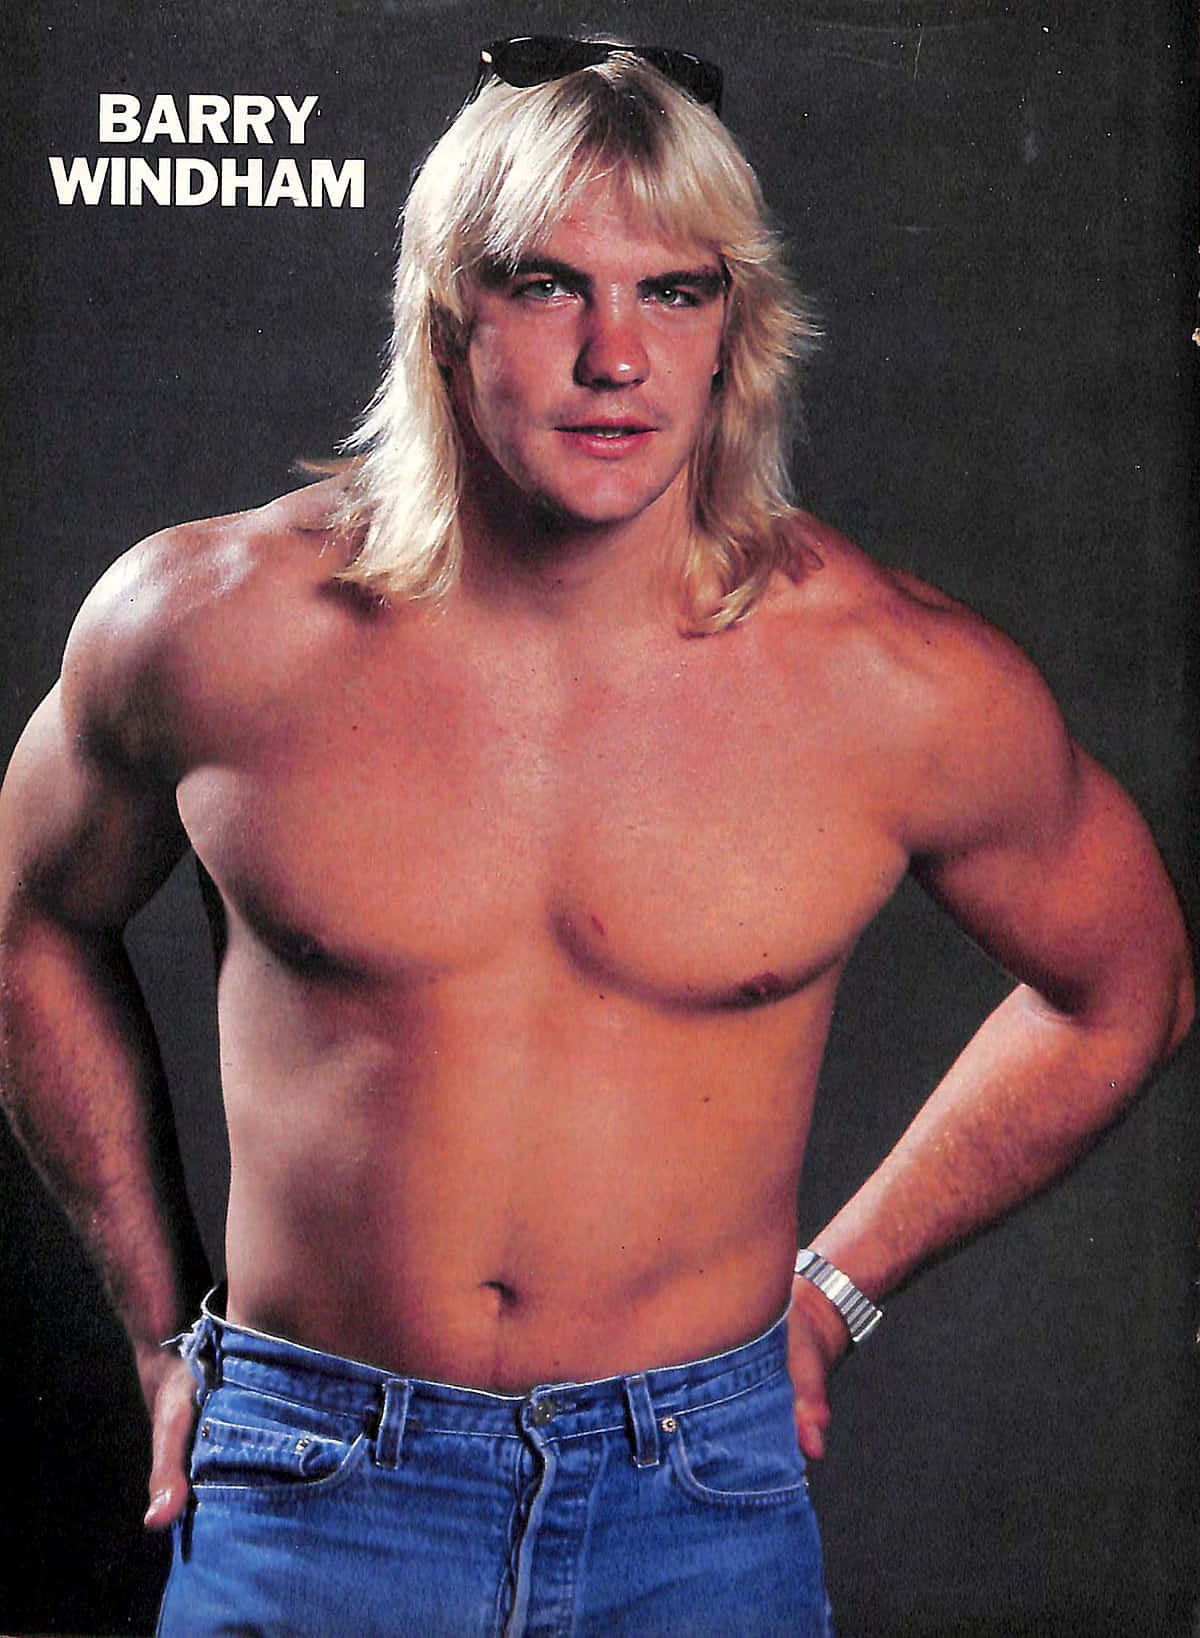 Barry Windham Blue Jeans Wallpaper